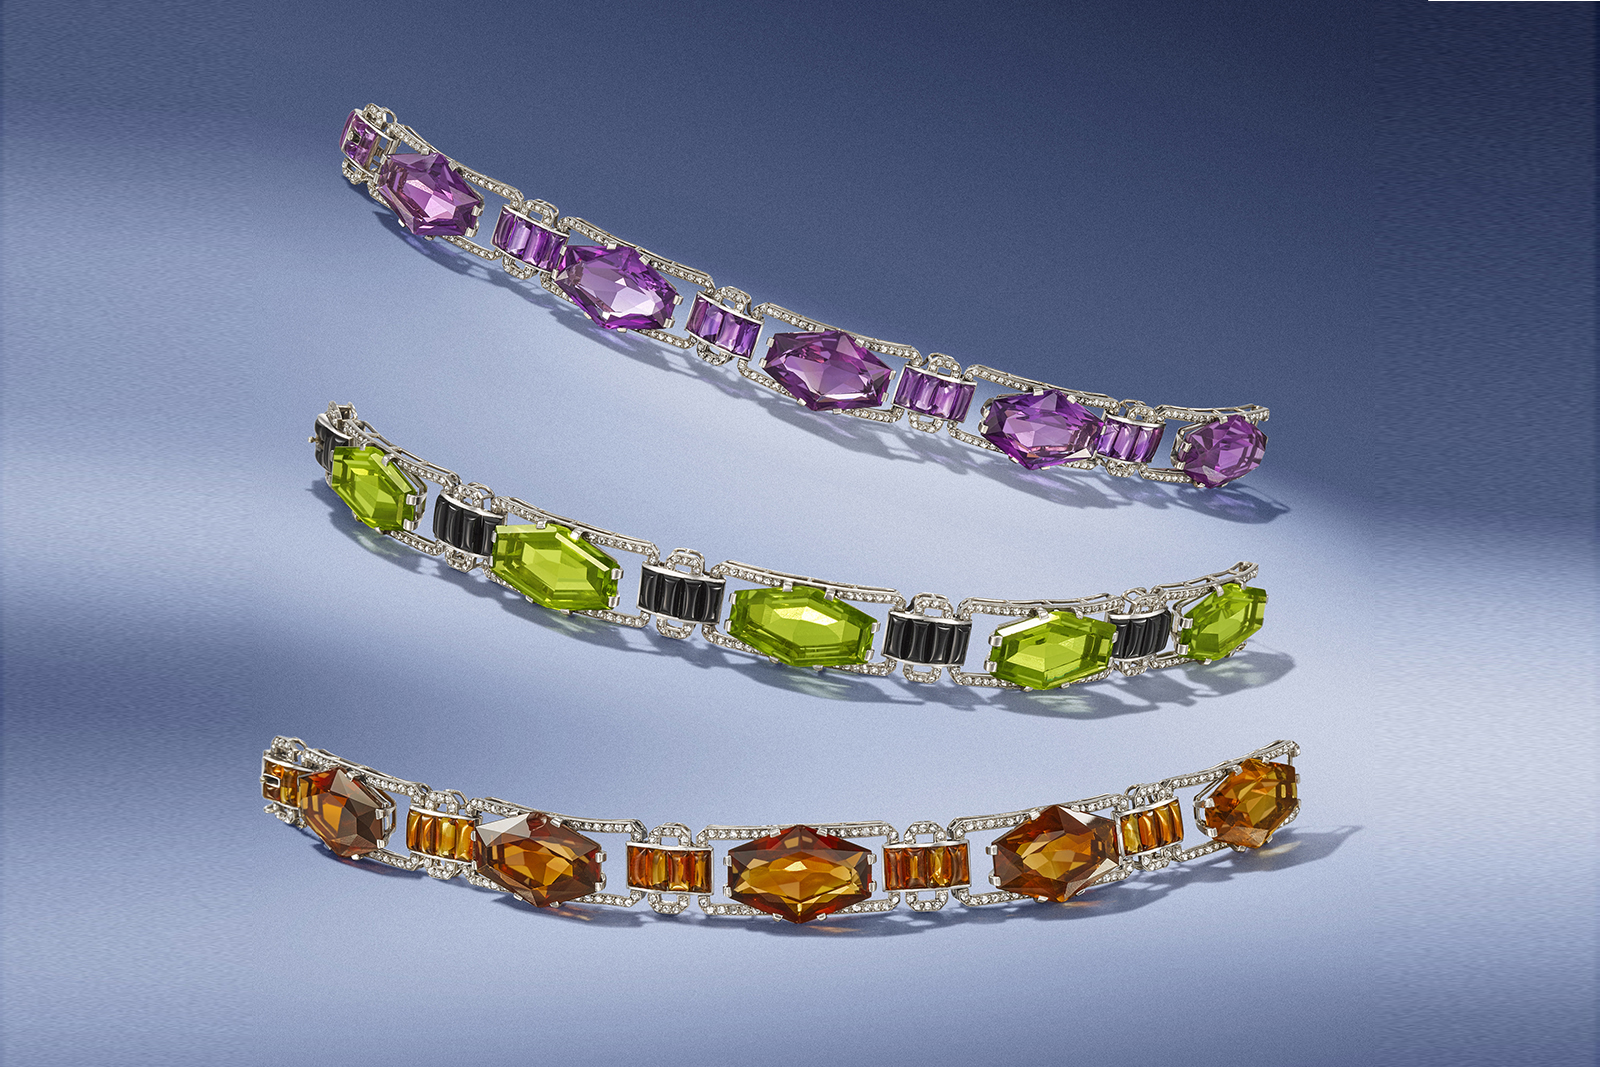 Setting three types of semi-precious stones in high jewellery, rather than traditional diamonds and gemstones, singled Van Cleef & Arpels out as a trailblazer during the Art Deco era